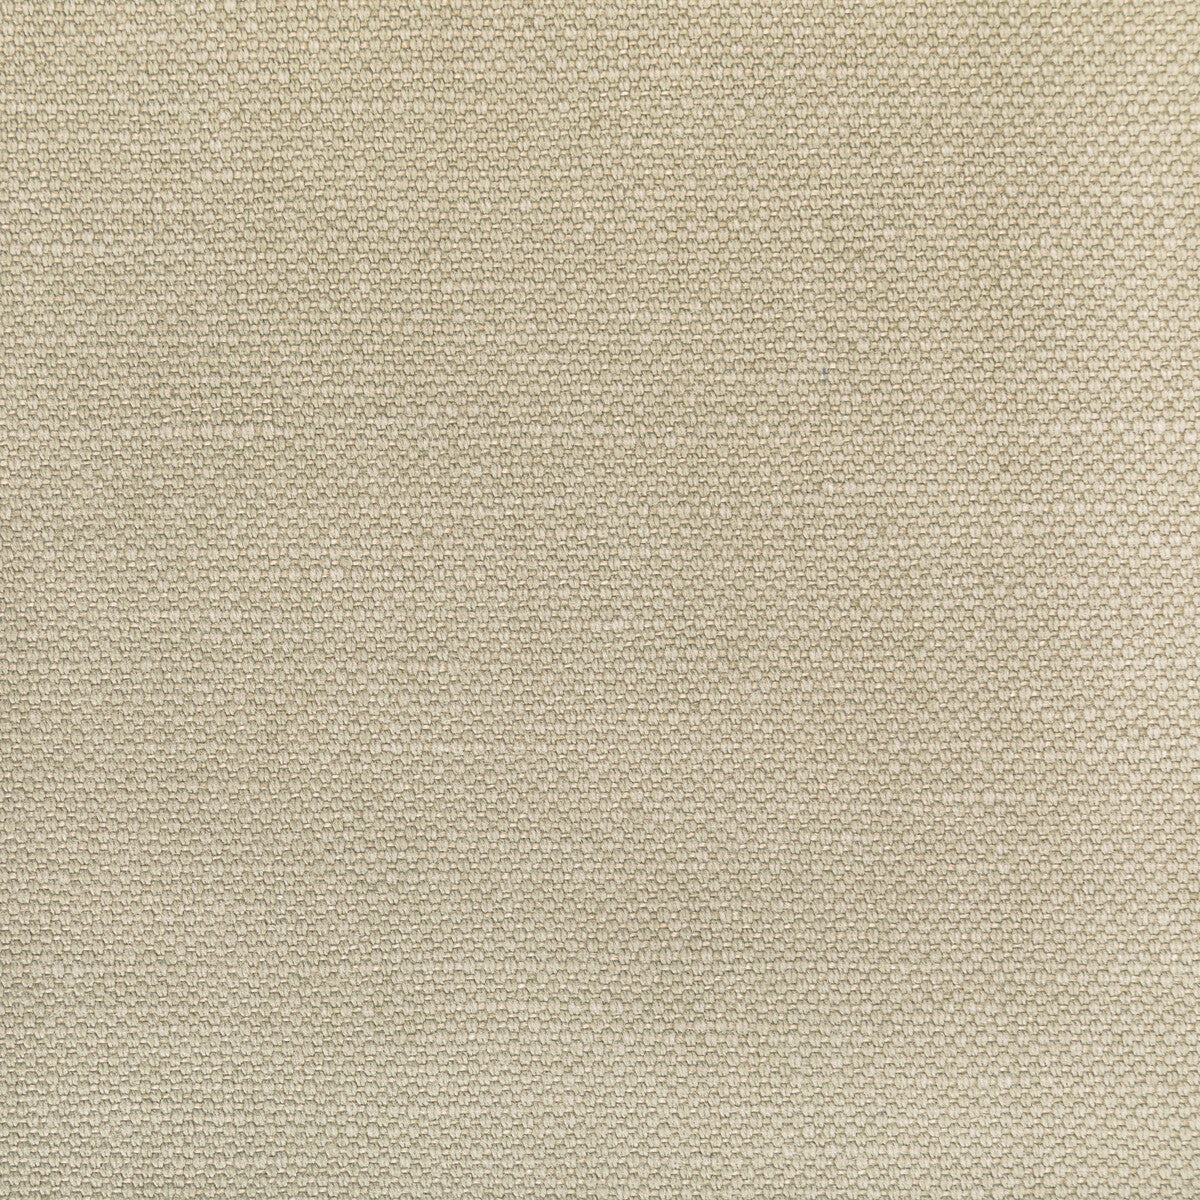 Carson fabric in taupe color - pattern 36282.1611.0 - by Kravet Basics